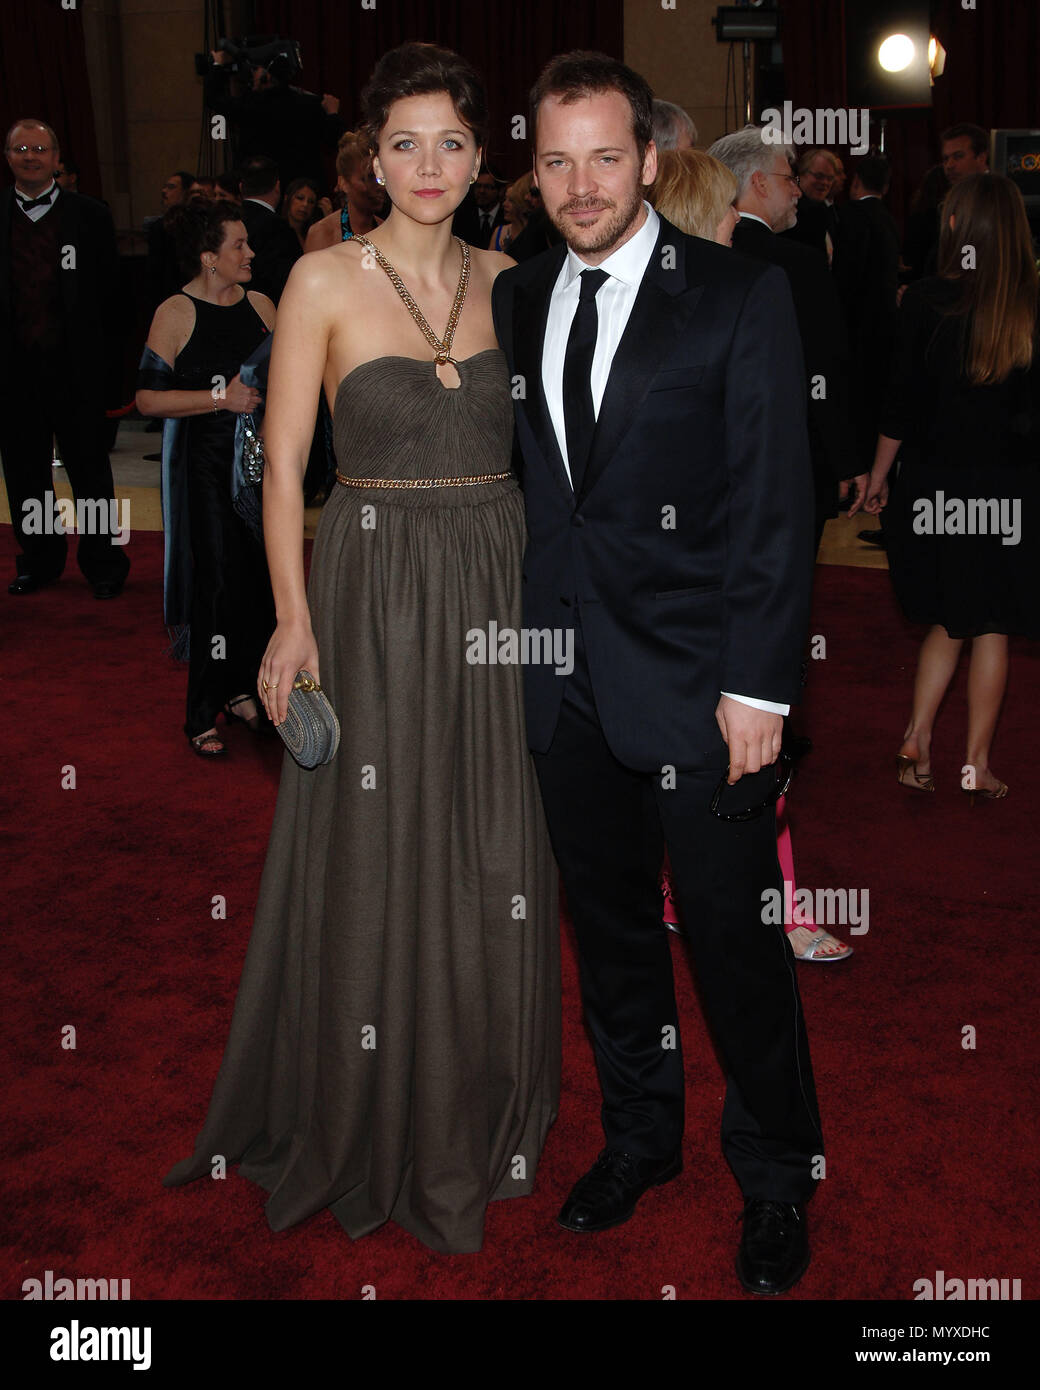 Maggie Gyllenhaal & Peter Sarsgaard arriving at the 78th Annual Academy Awards at the Kodak Theatre in Hollywood March 5th, 2006. GyllenhaalMaggie SarsgaardPeter148  Event in Hollywood Life - California, Red Carpet Event, USA, Film Industry, Celebrities, Photography, Bestof, Arts Culture and Entertainment, Celebrities fashion, Best of, Hollywood Life, Event in Hollywood Life - California, Red Carpet and backstage, Music celebrities, Topix, Couple, family ( husband and wife ) and kids- Children, brothers and sisters inquiry tsuni@Gamma-USA.com, Credit Tsuni / USA, 2006 to 2009 Stock Photo